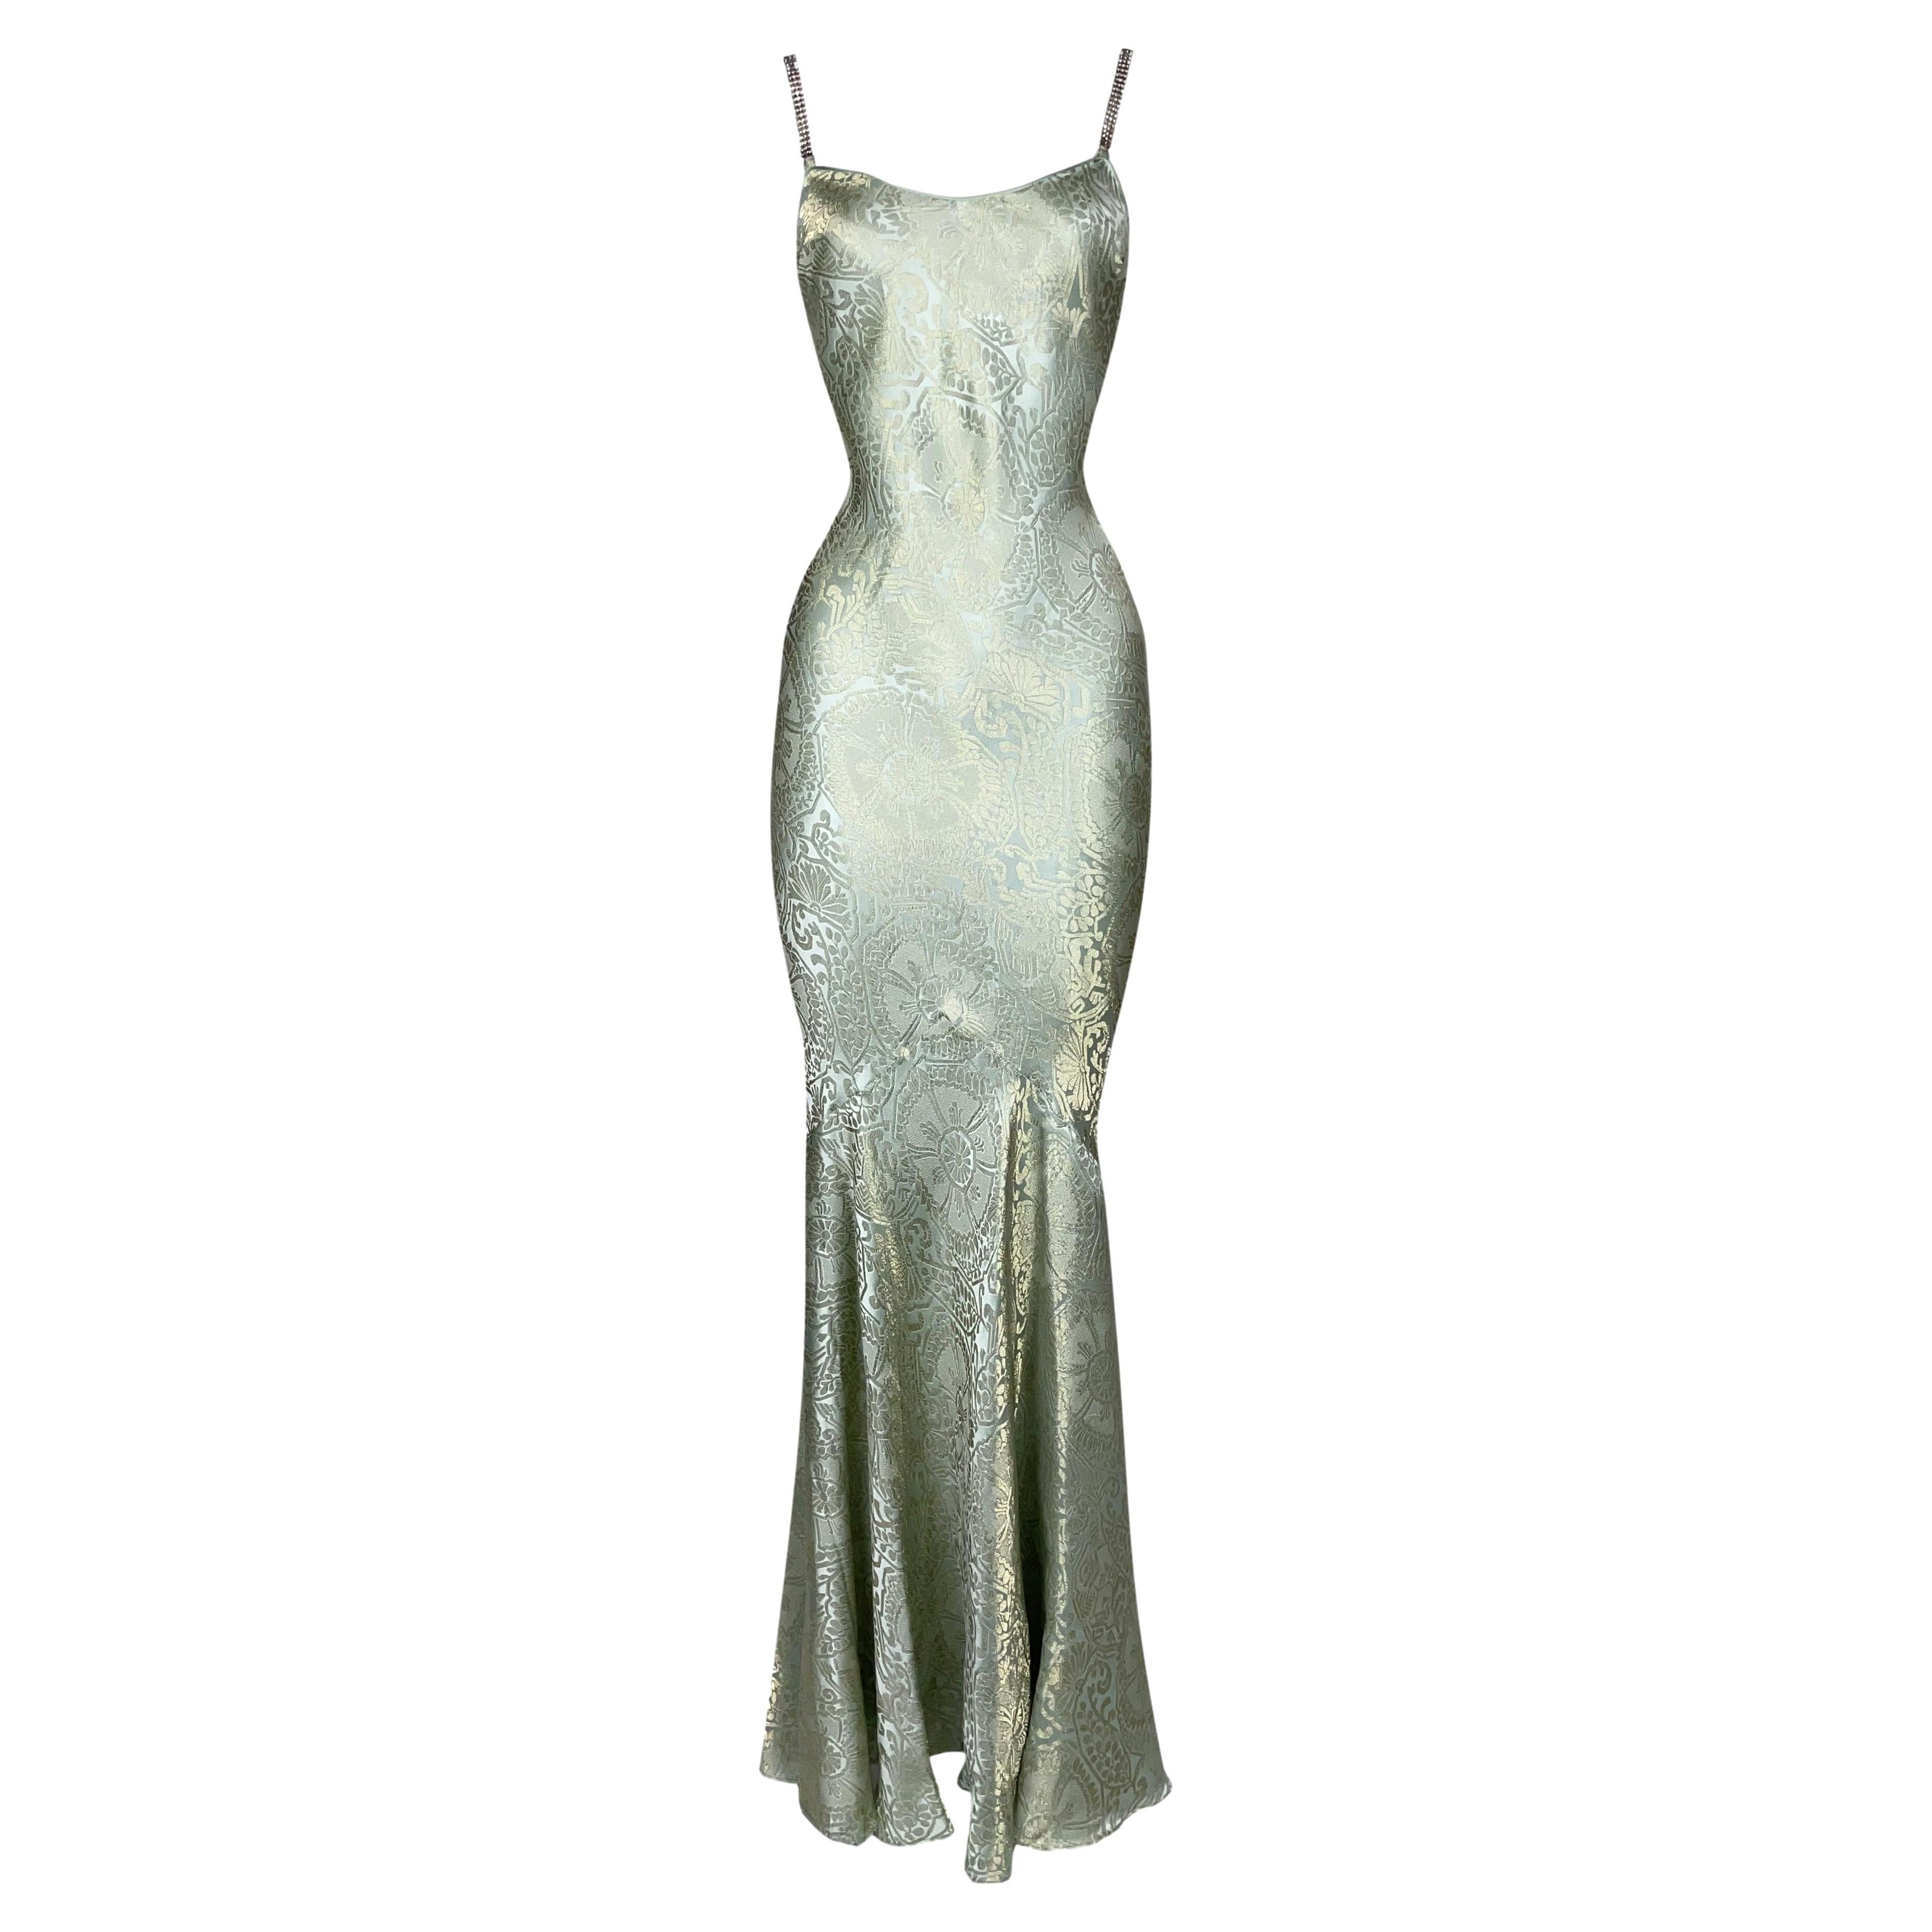 S/S 2001 John Galliano Mint Green & Gold Mermaid Gown Dress w Crystal Straps For Sale